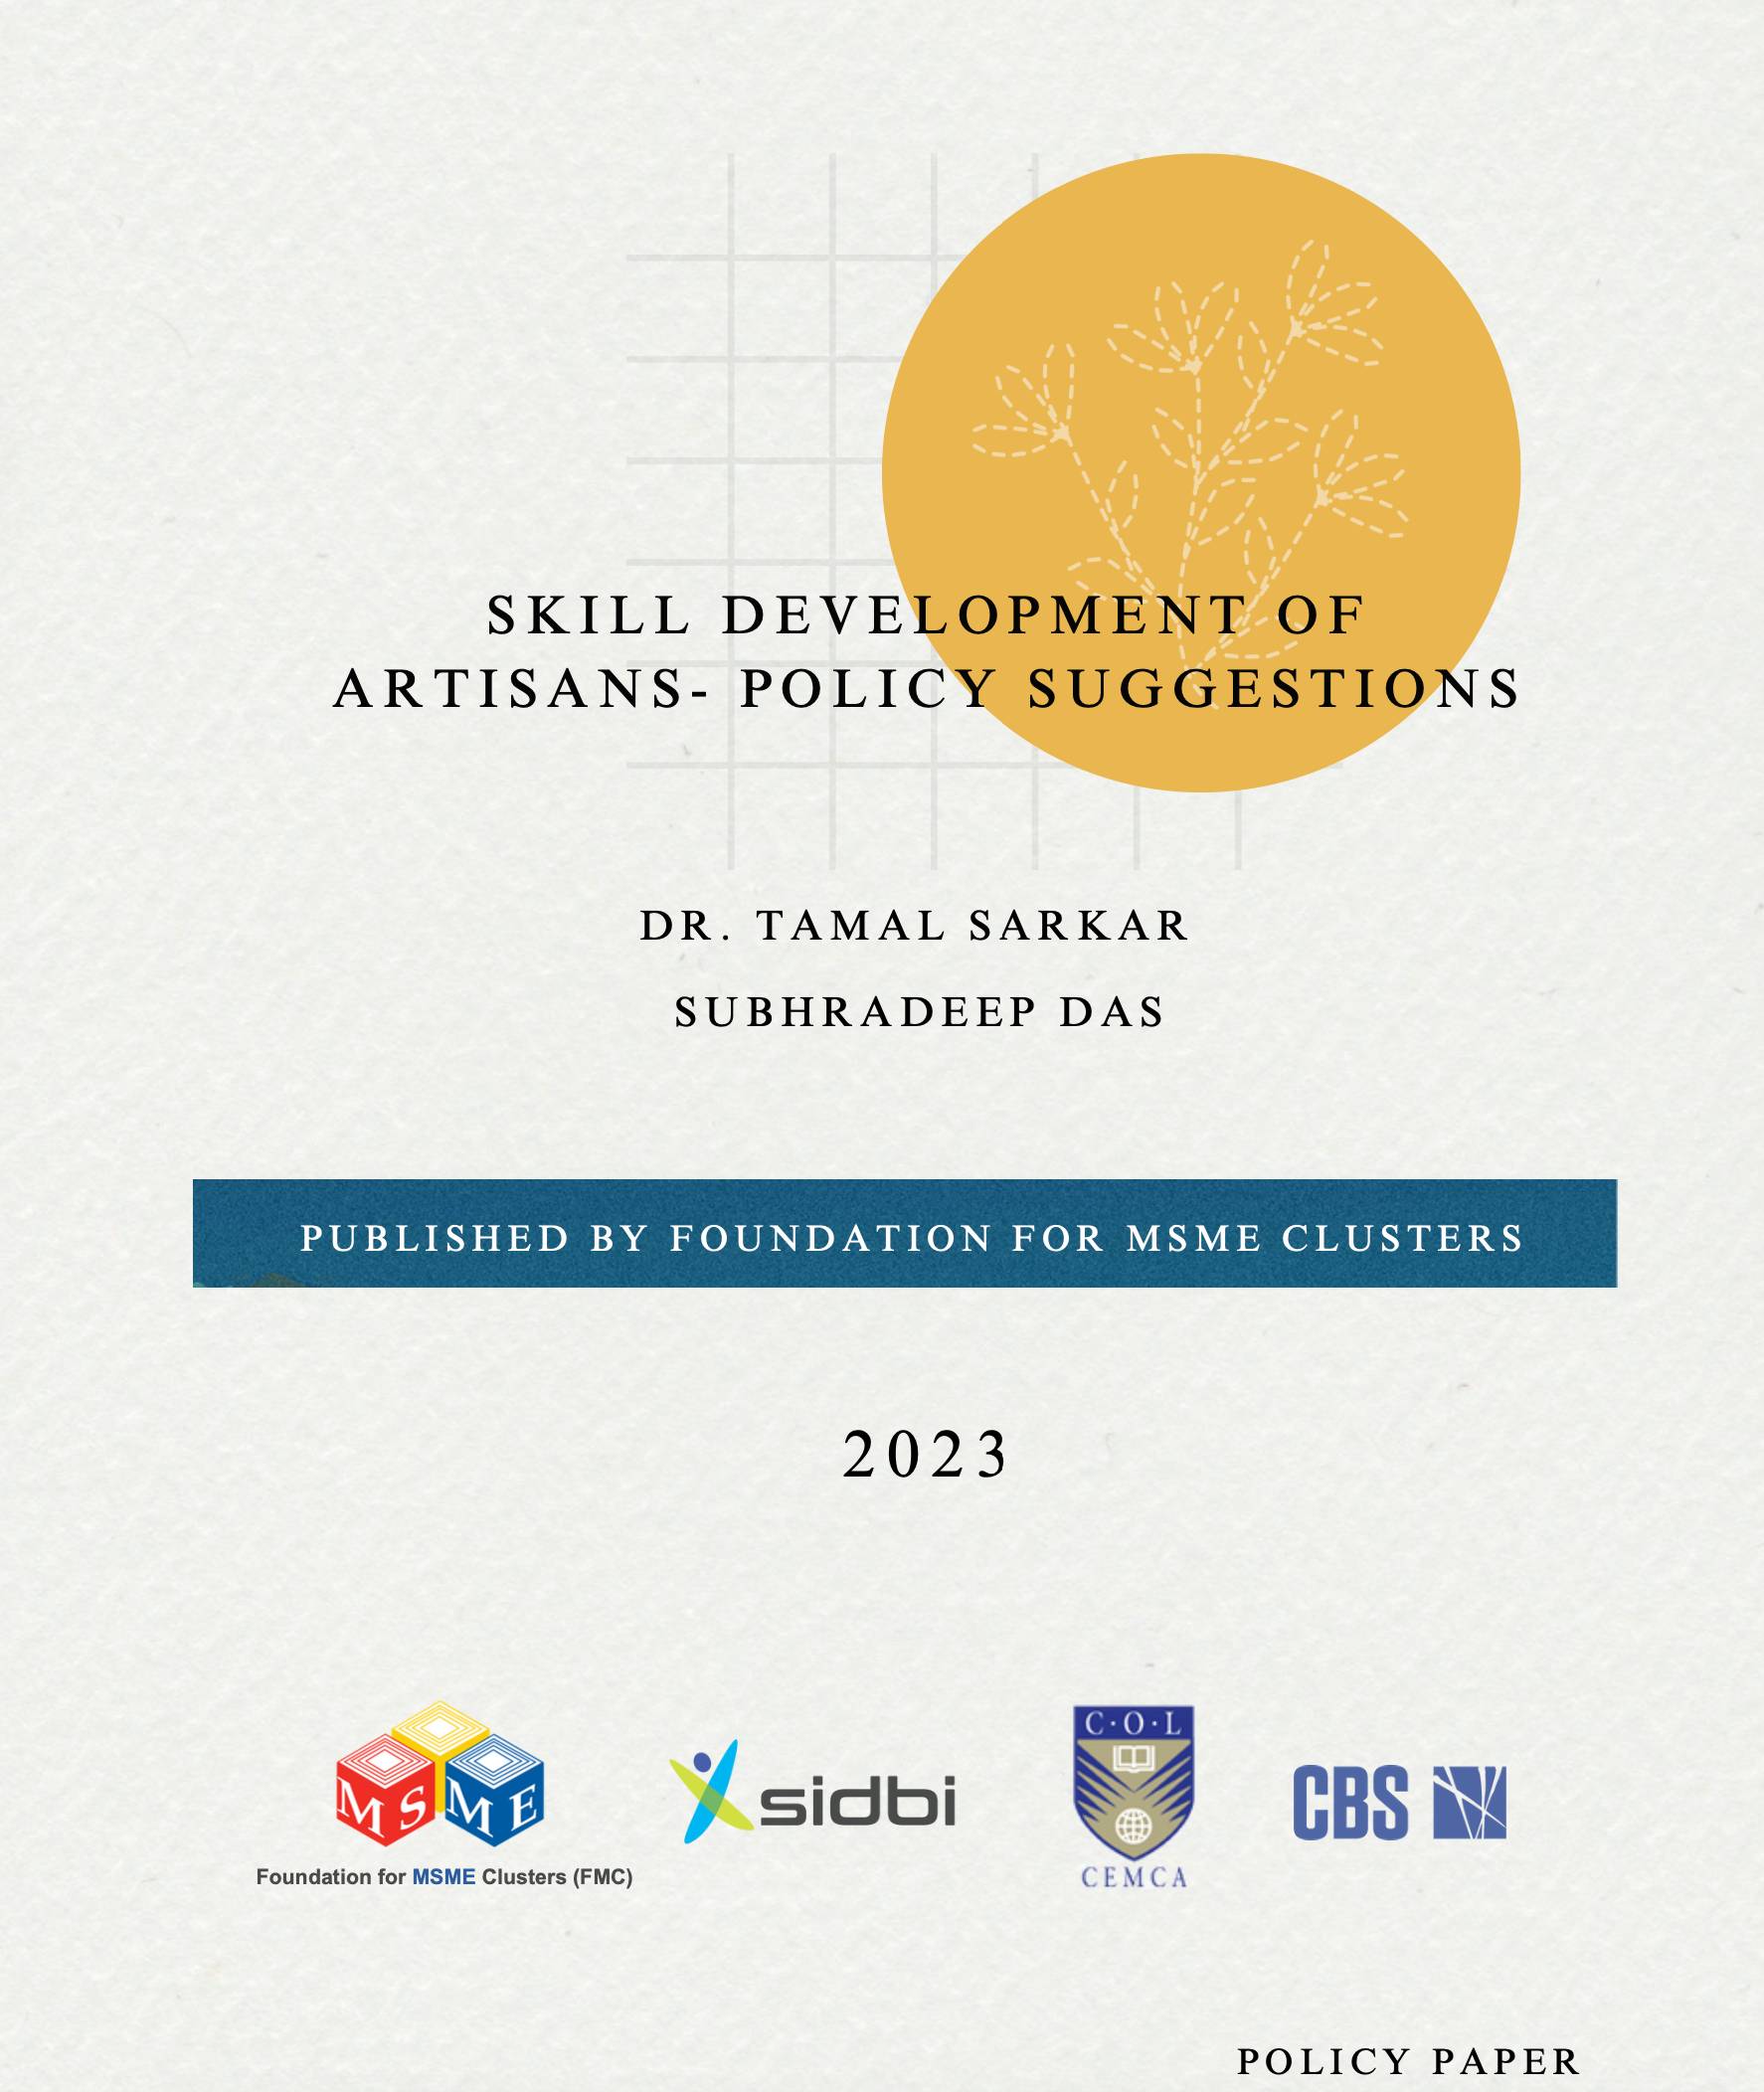 Skill development of artisans - Policy Suggestions